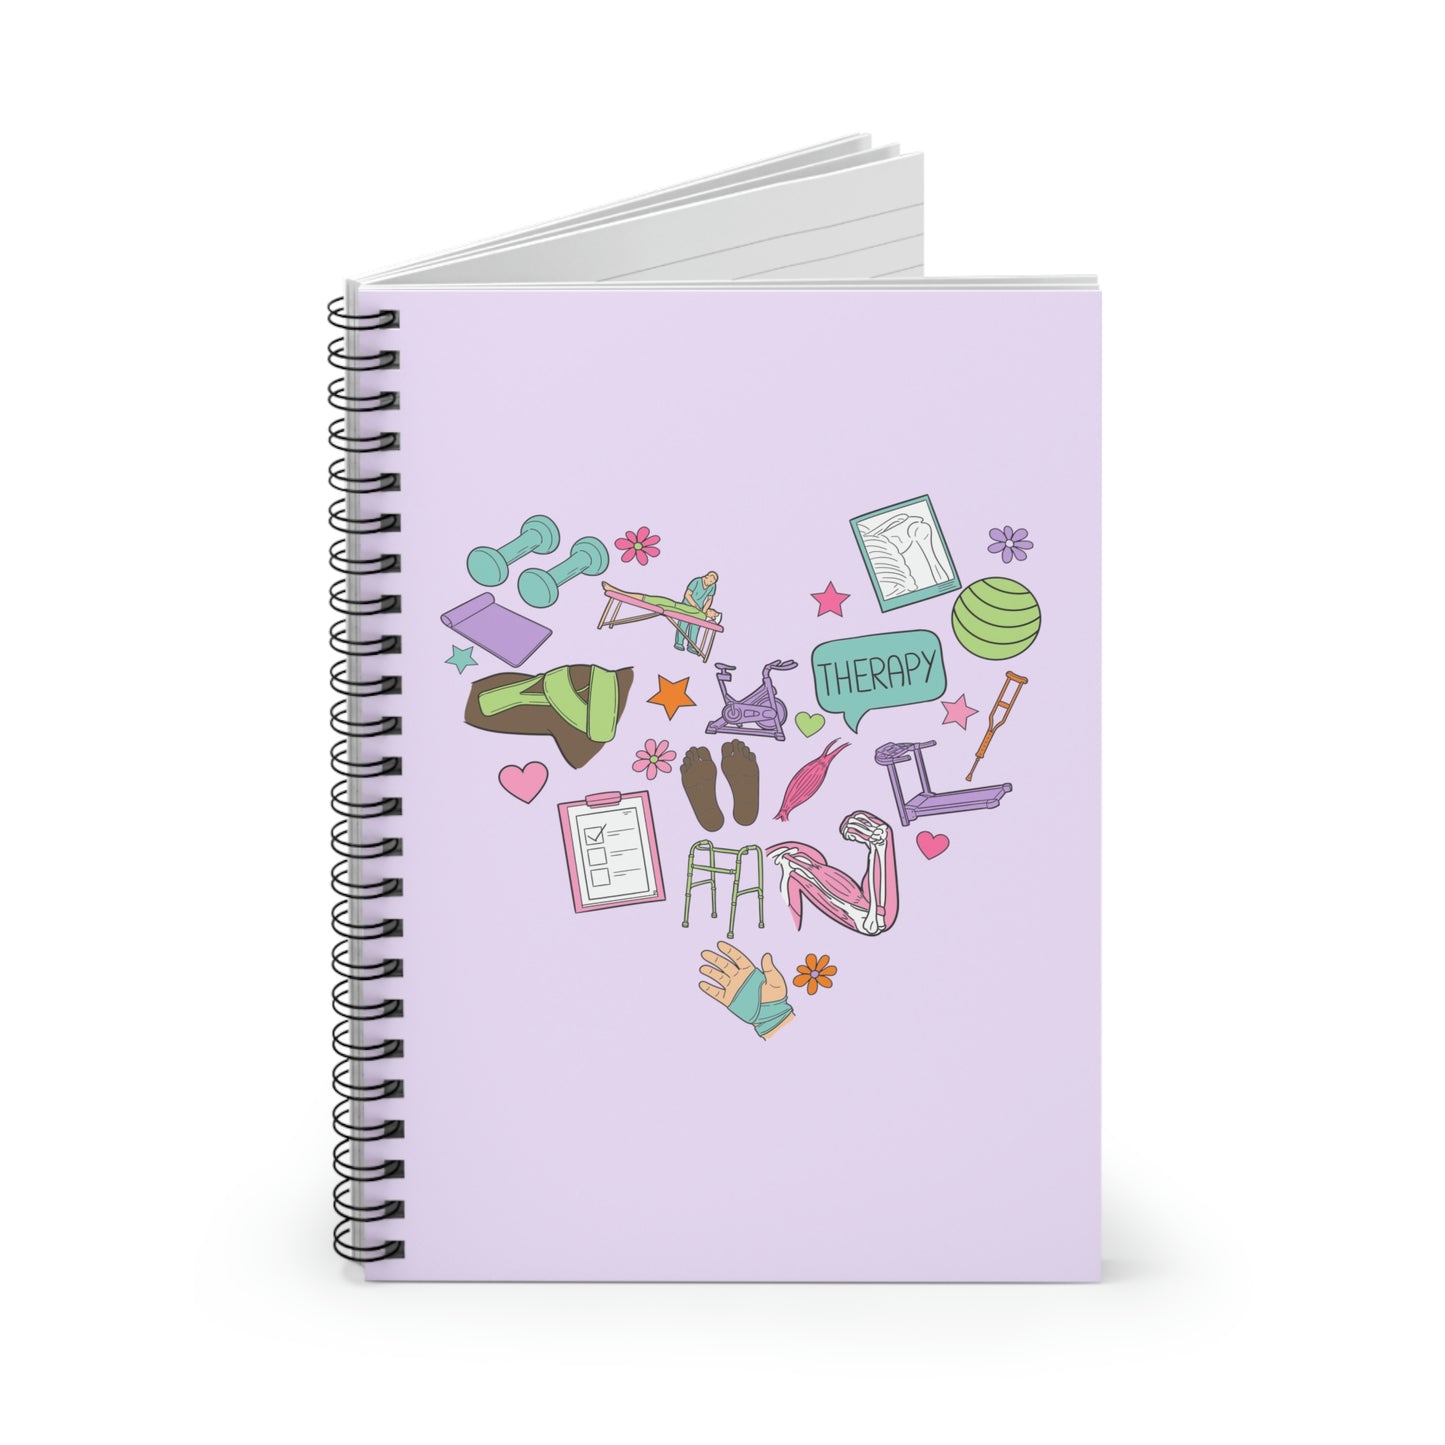 Physical Therapy Essentials Spiral Ruled Line Notebook